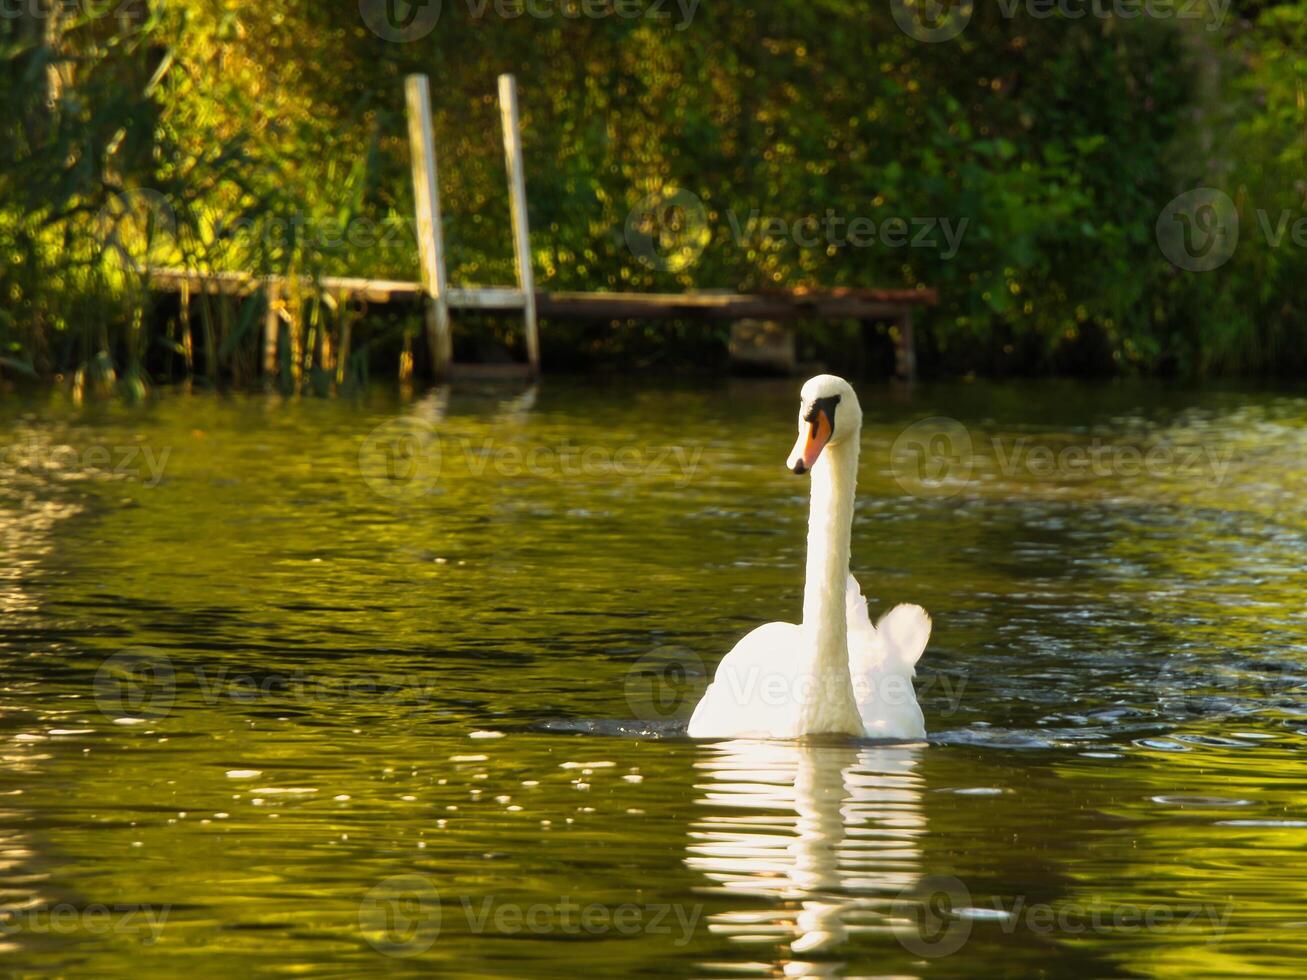 an elegant white swan swims in the water. the wild animal appears majestic. Bird photo